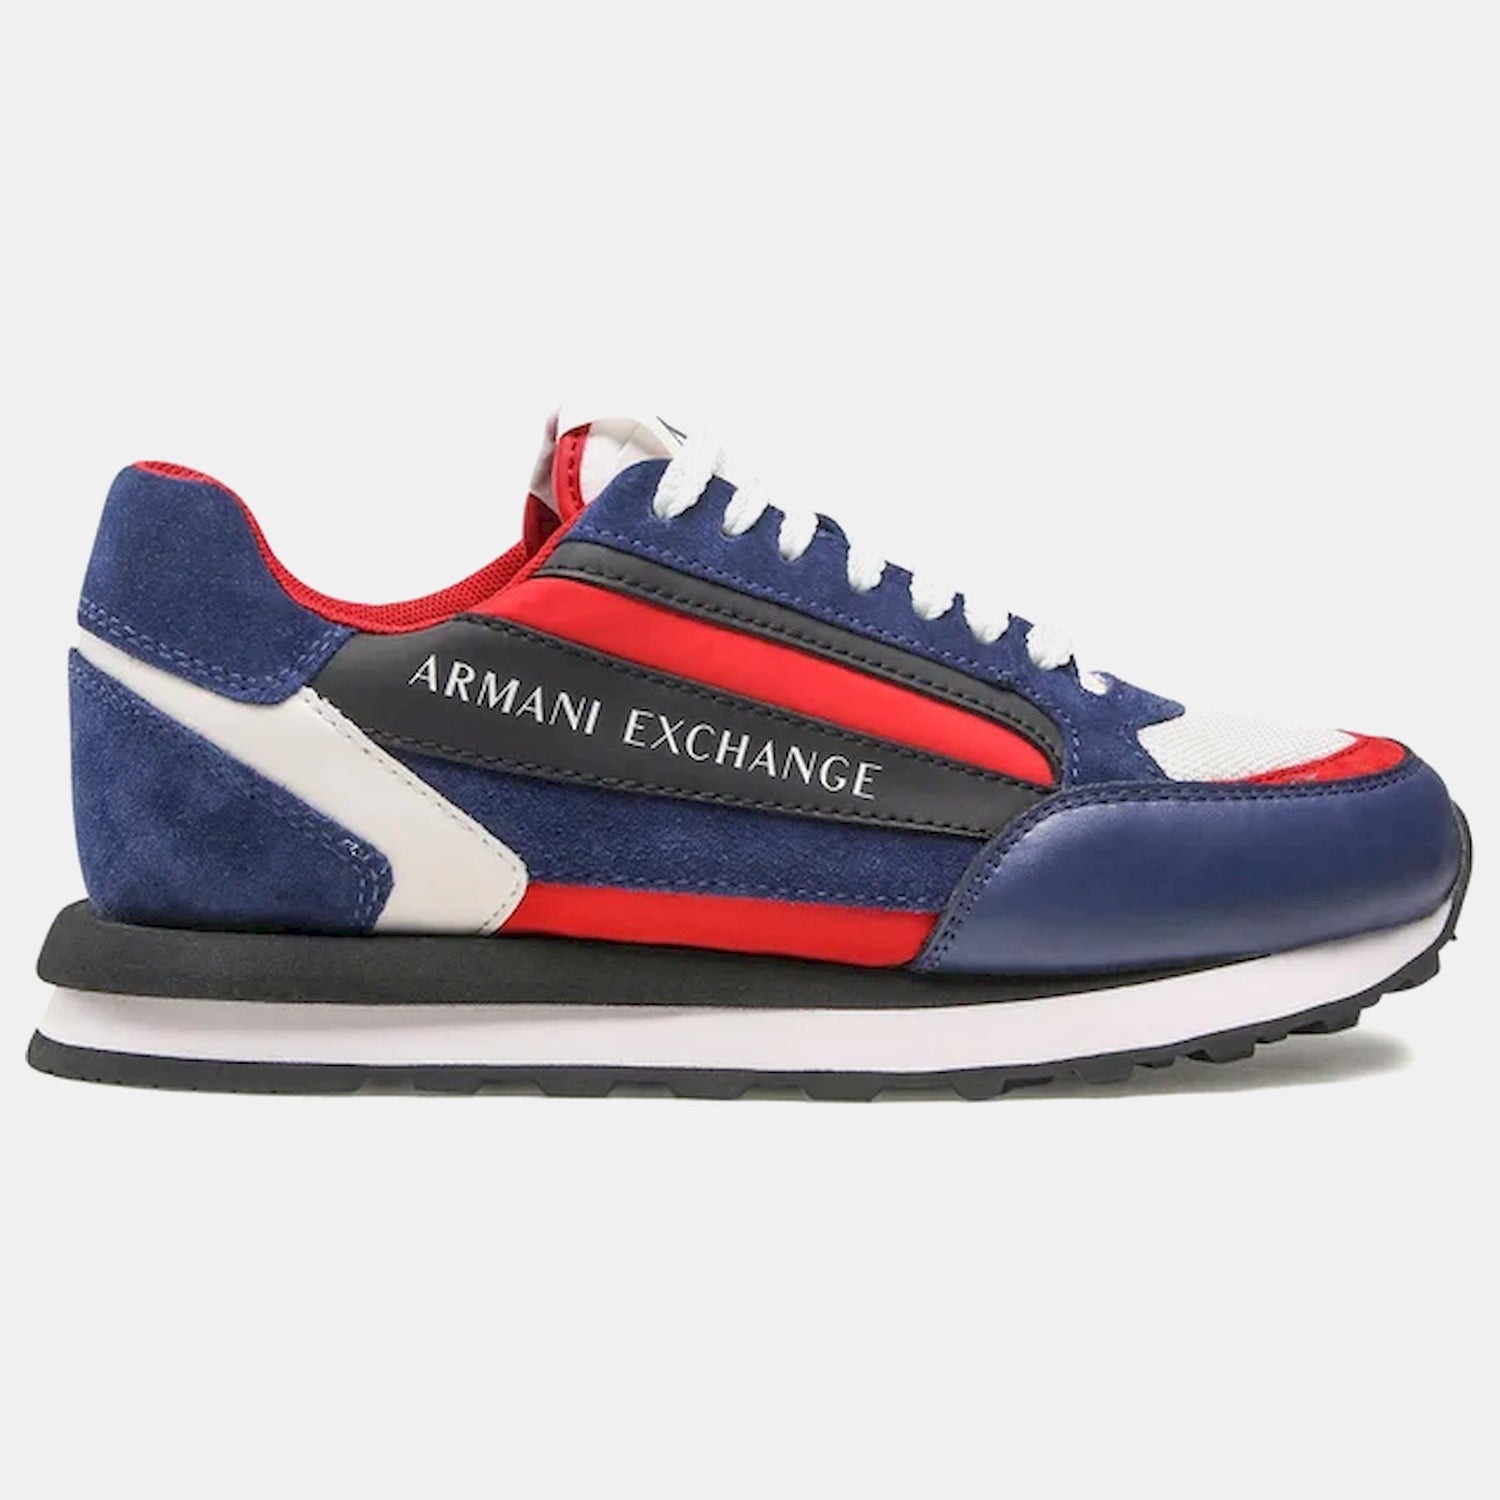 Armani Exchange Sapatilhas Sneakers Shoes Xux101 Xv294 Navy Red Navy Vermelho_shot5